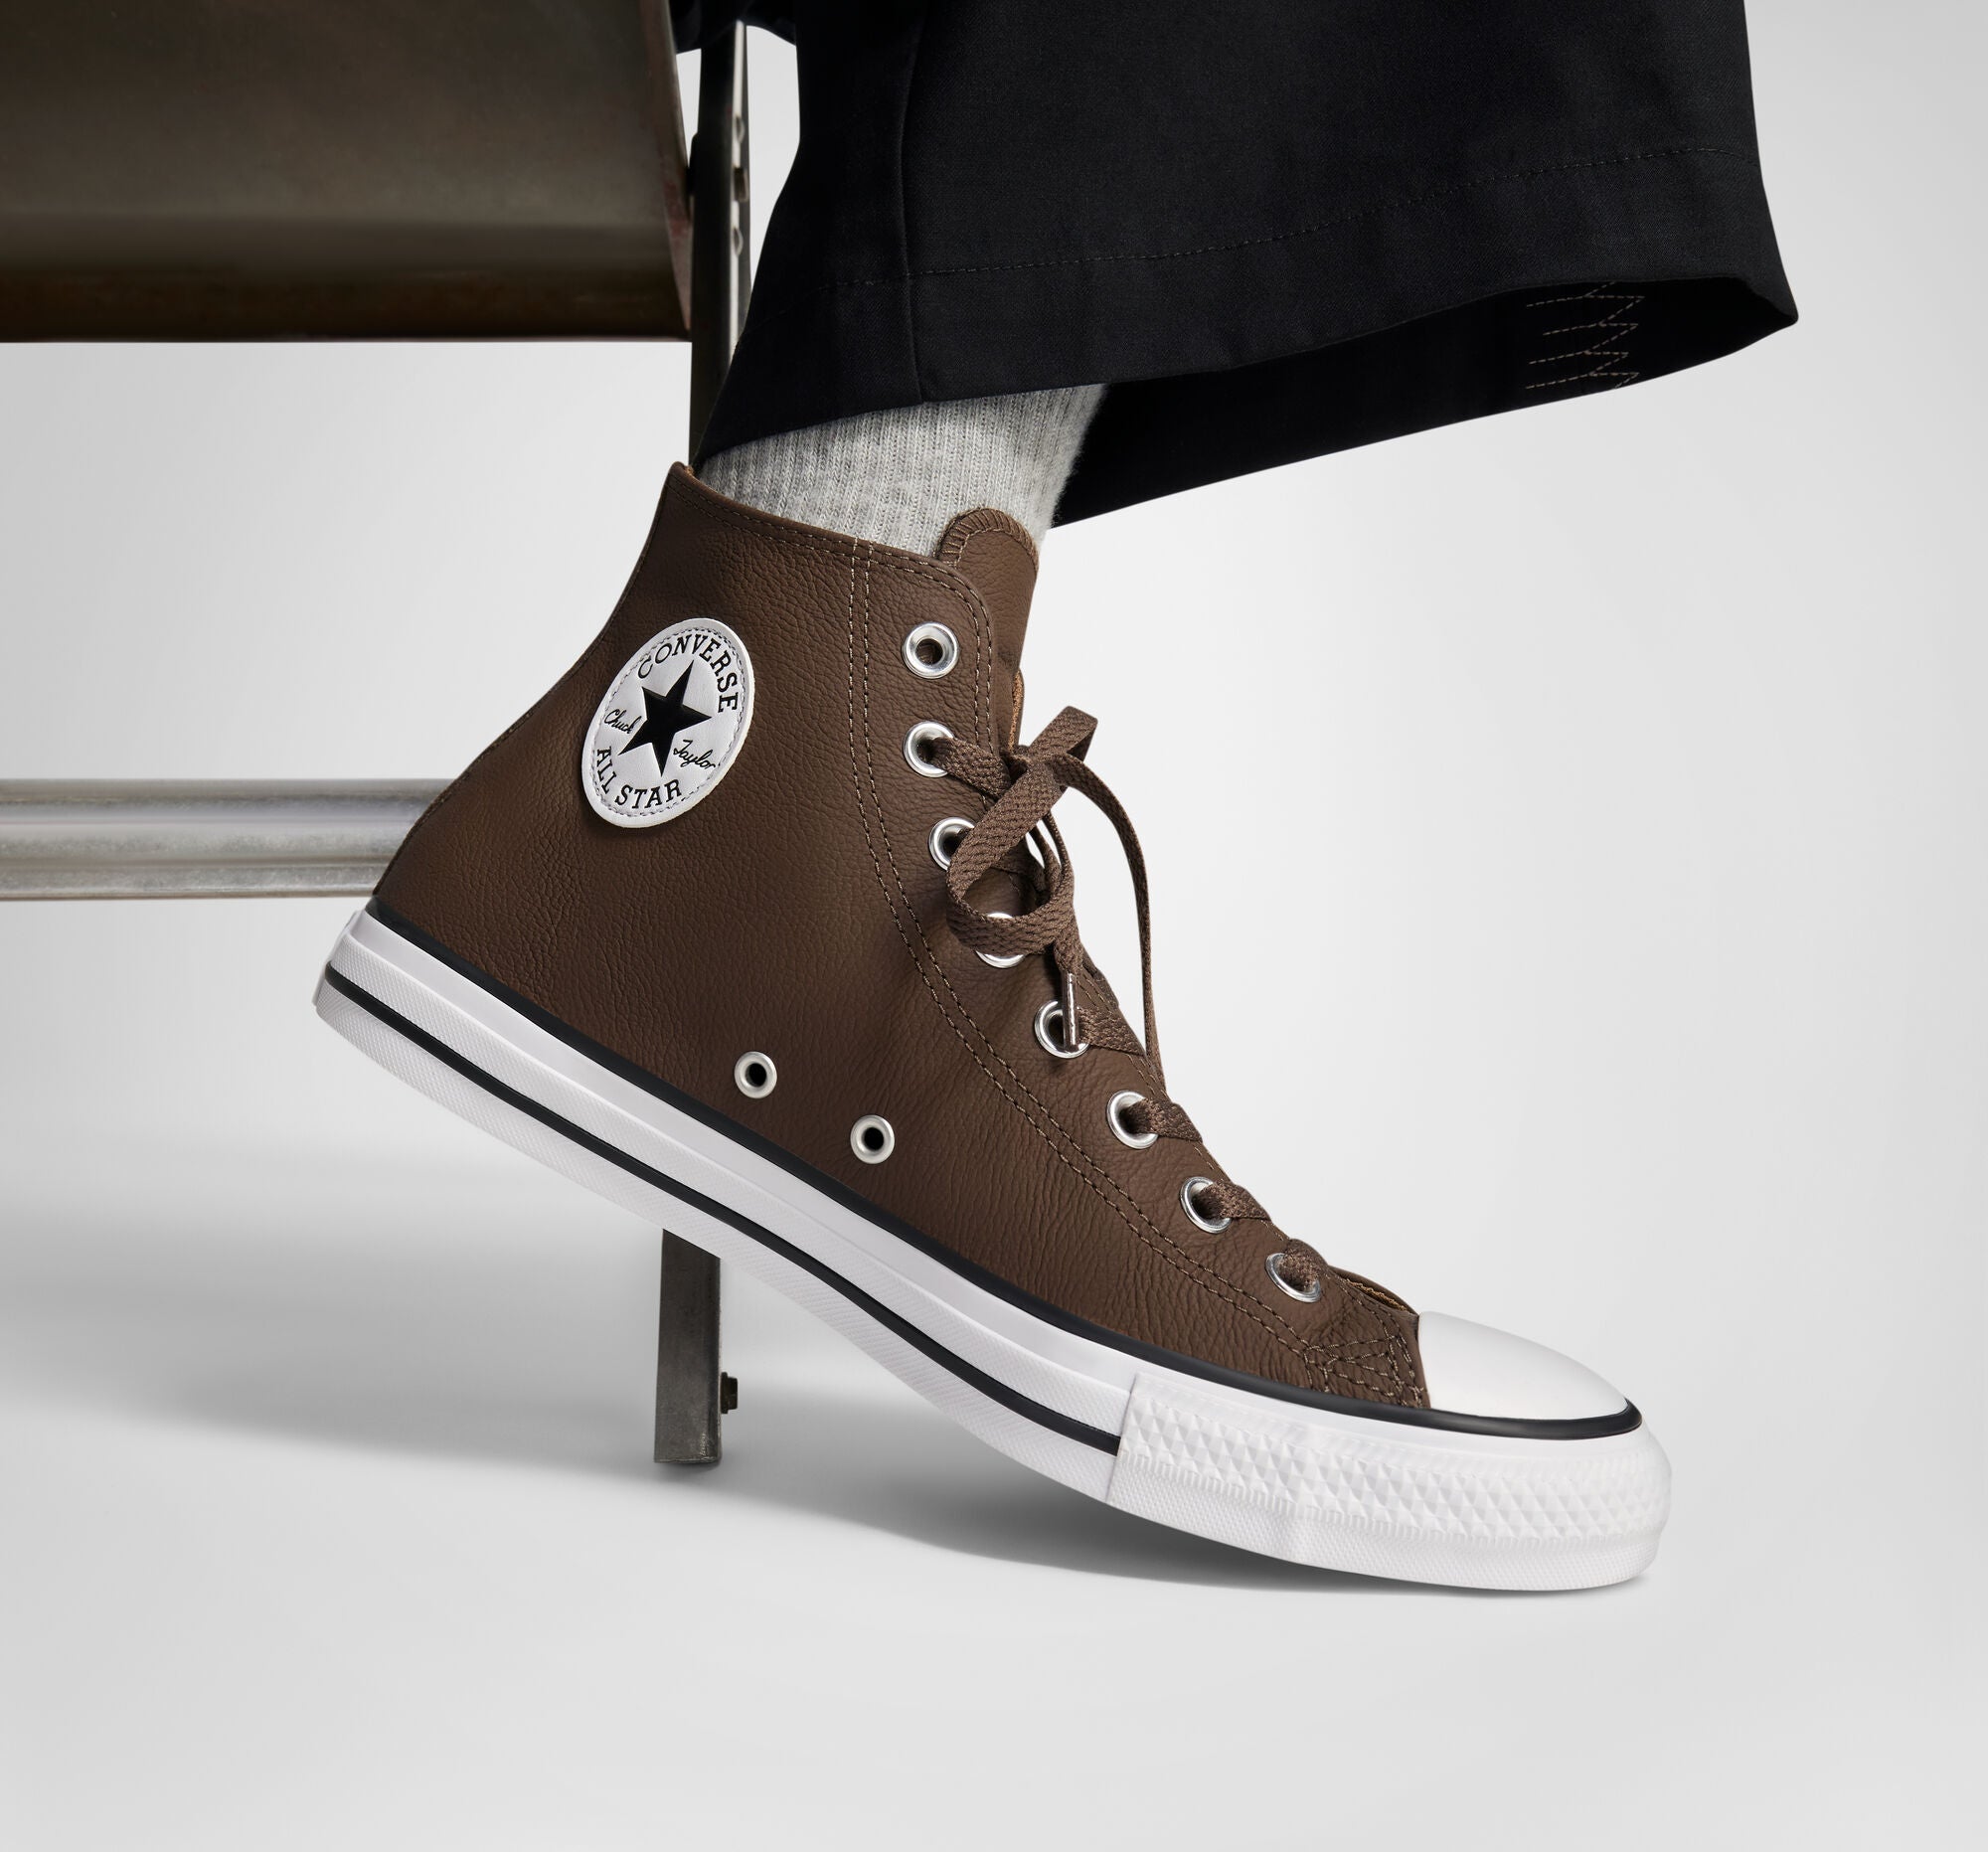 Converse Chuck Taylor All Star Hi leather trainers in dark brown